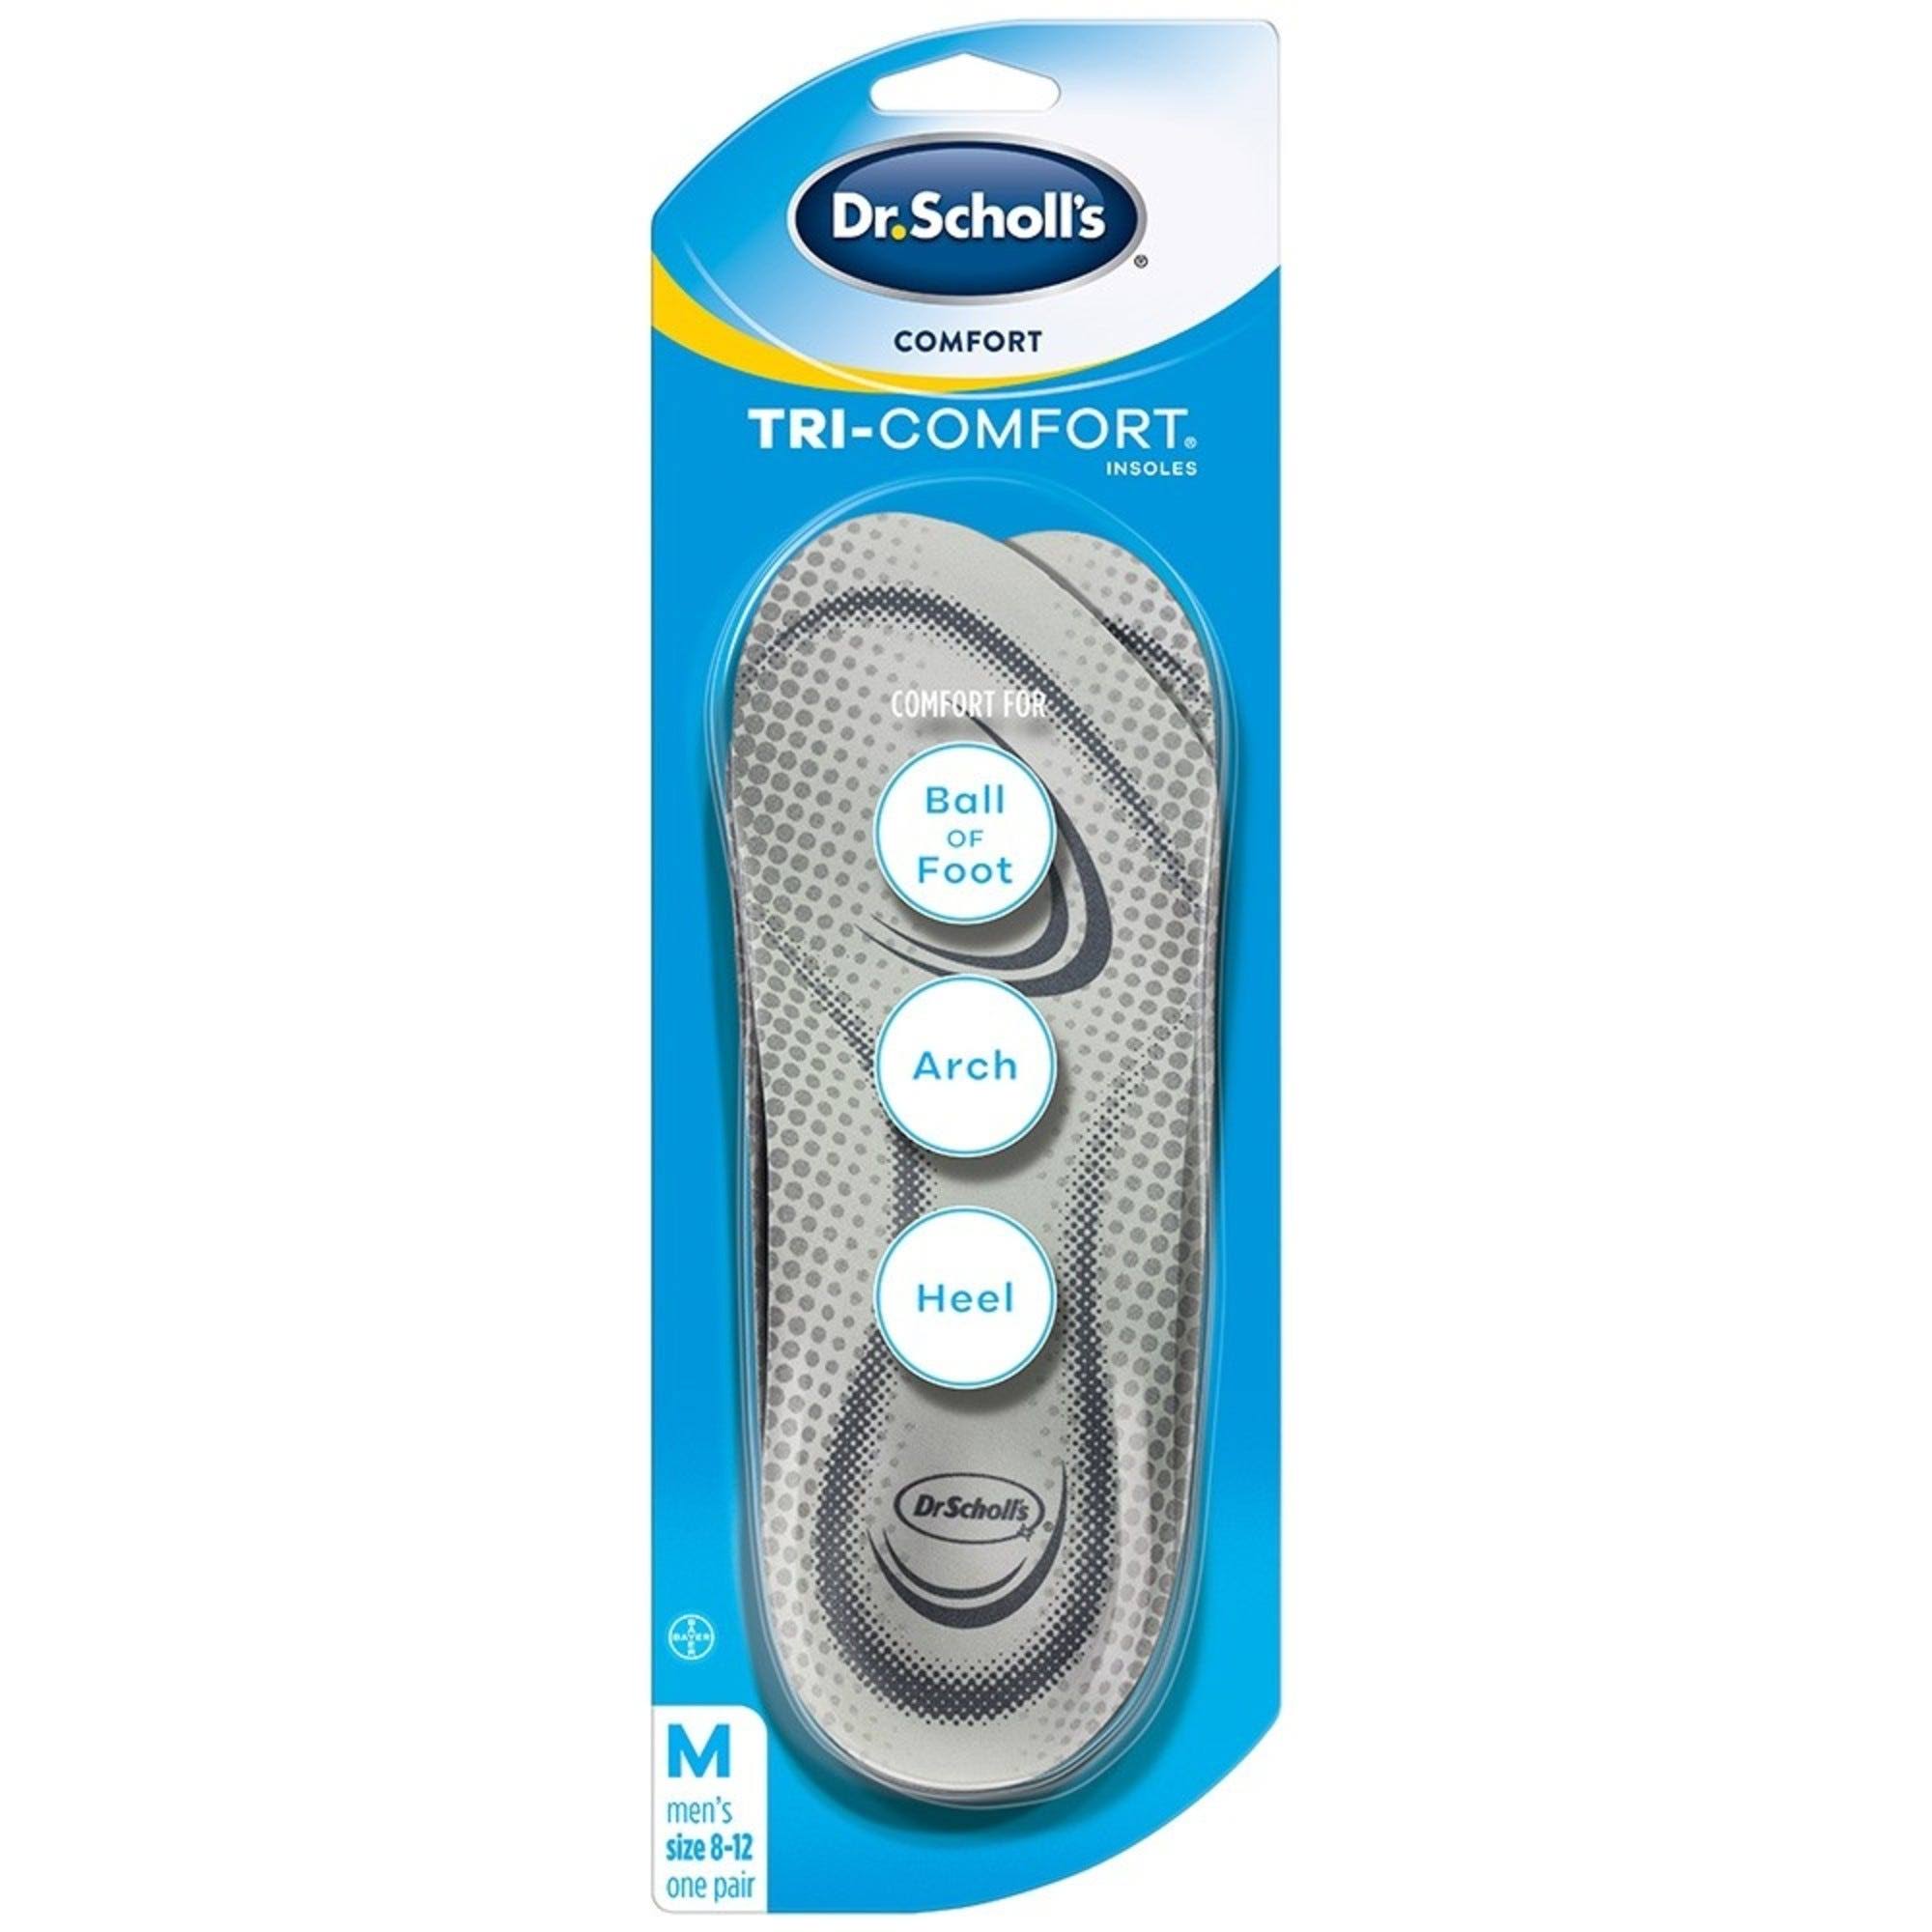 Dr. Scholl’s TRI-COMFORT Insoles // Comfort For Heel, Arch And Ball Of Foot With Targeted Cushioning And Arch Support